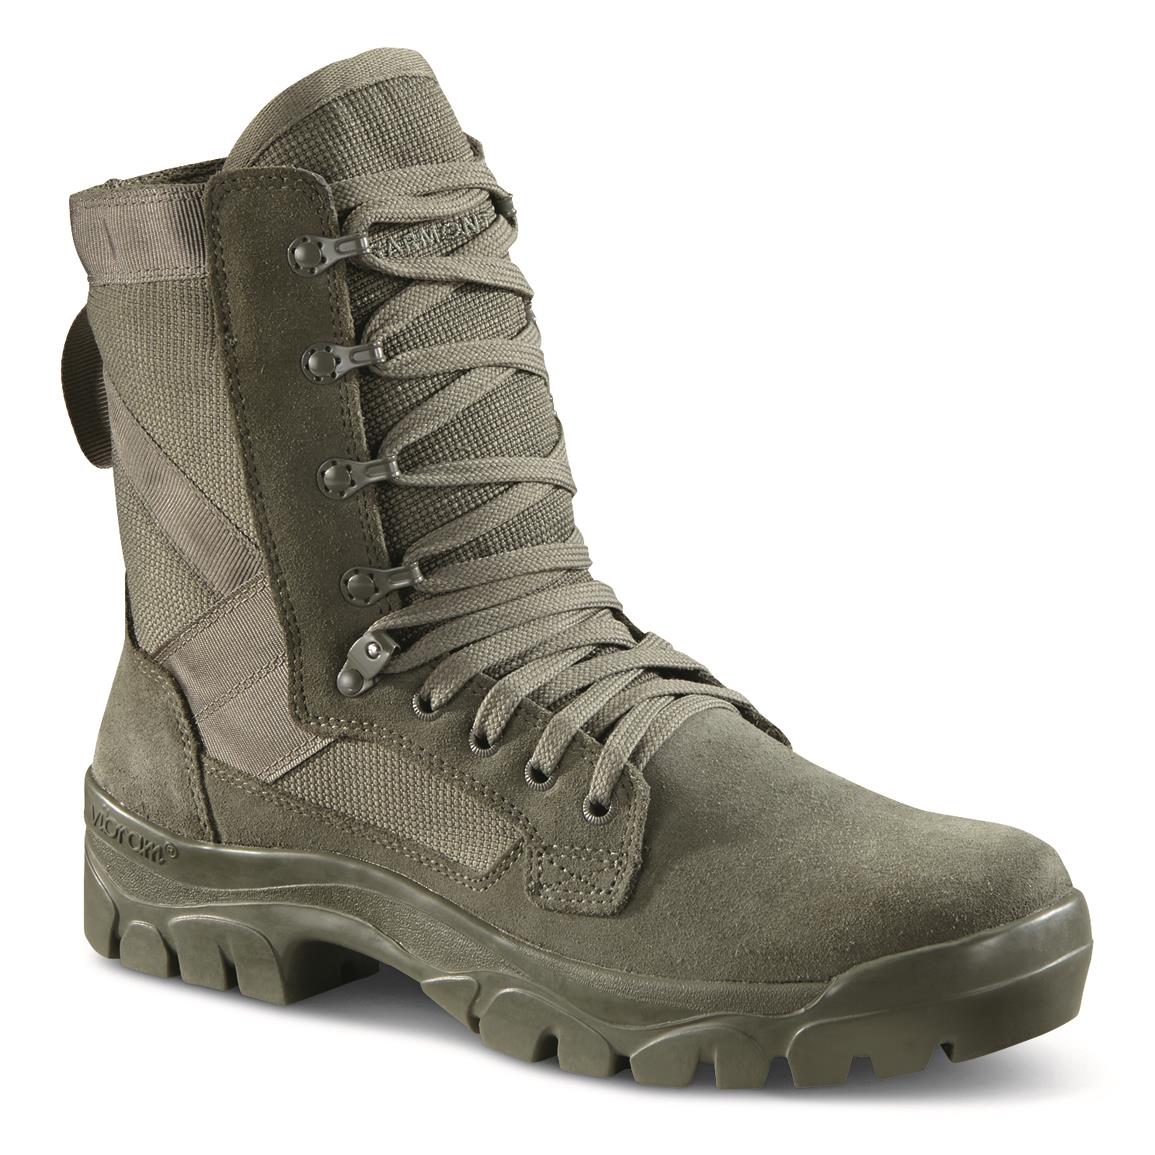 Garmont Boots Army - Army Military